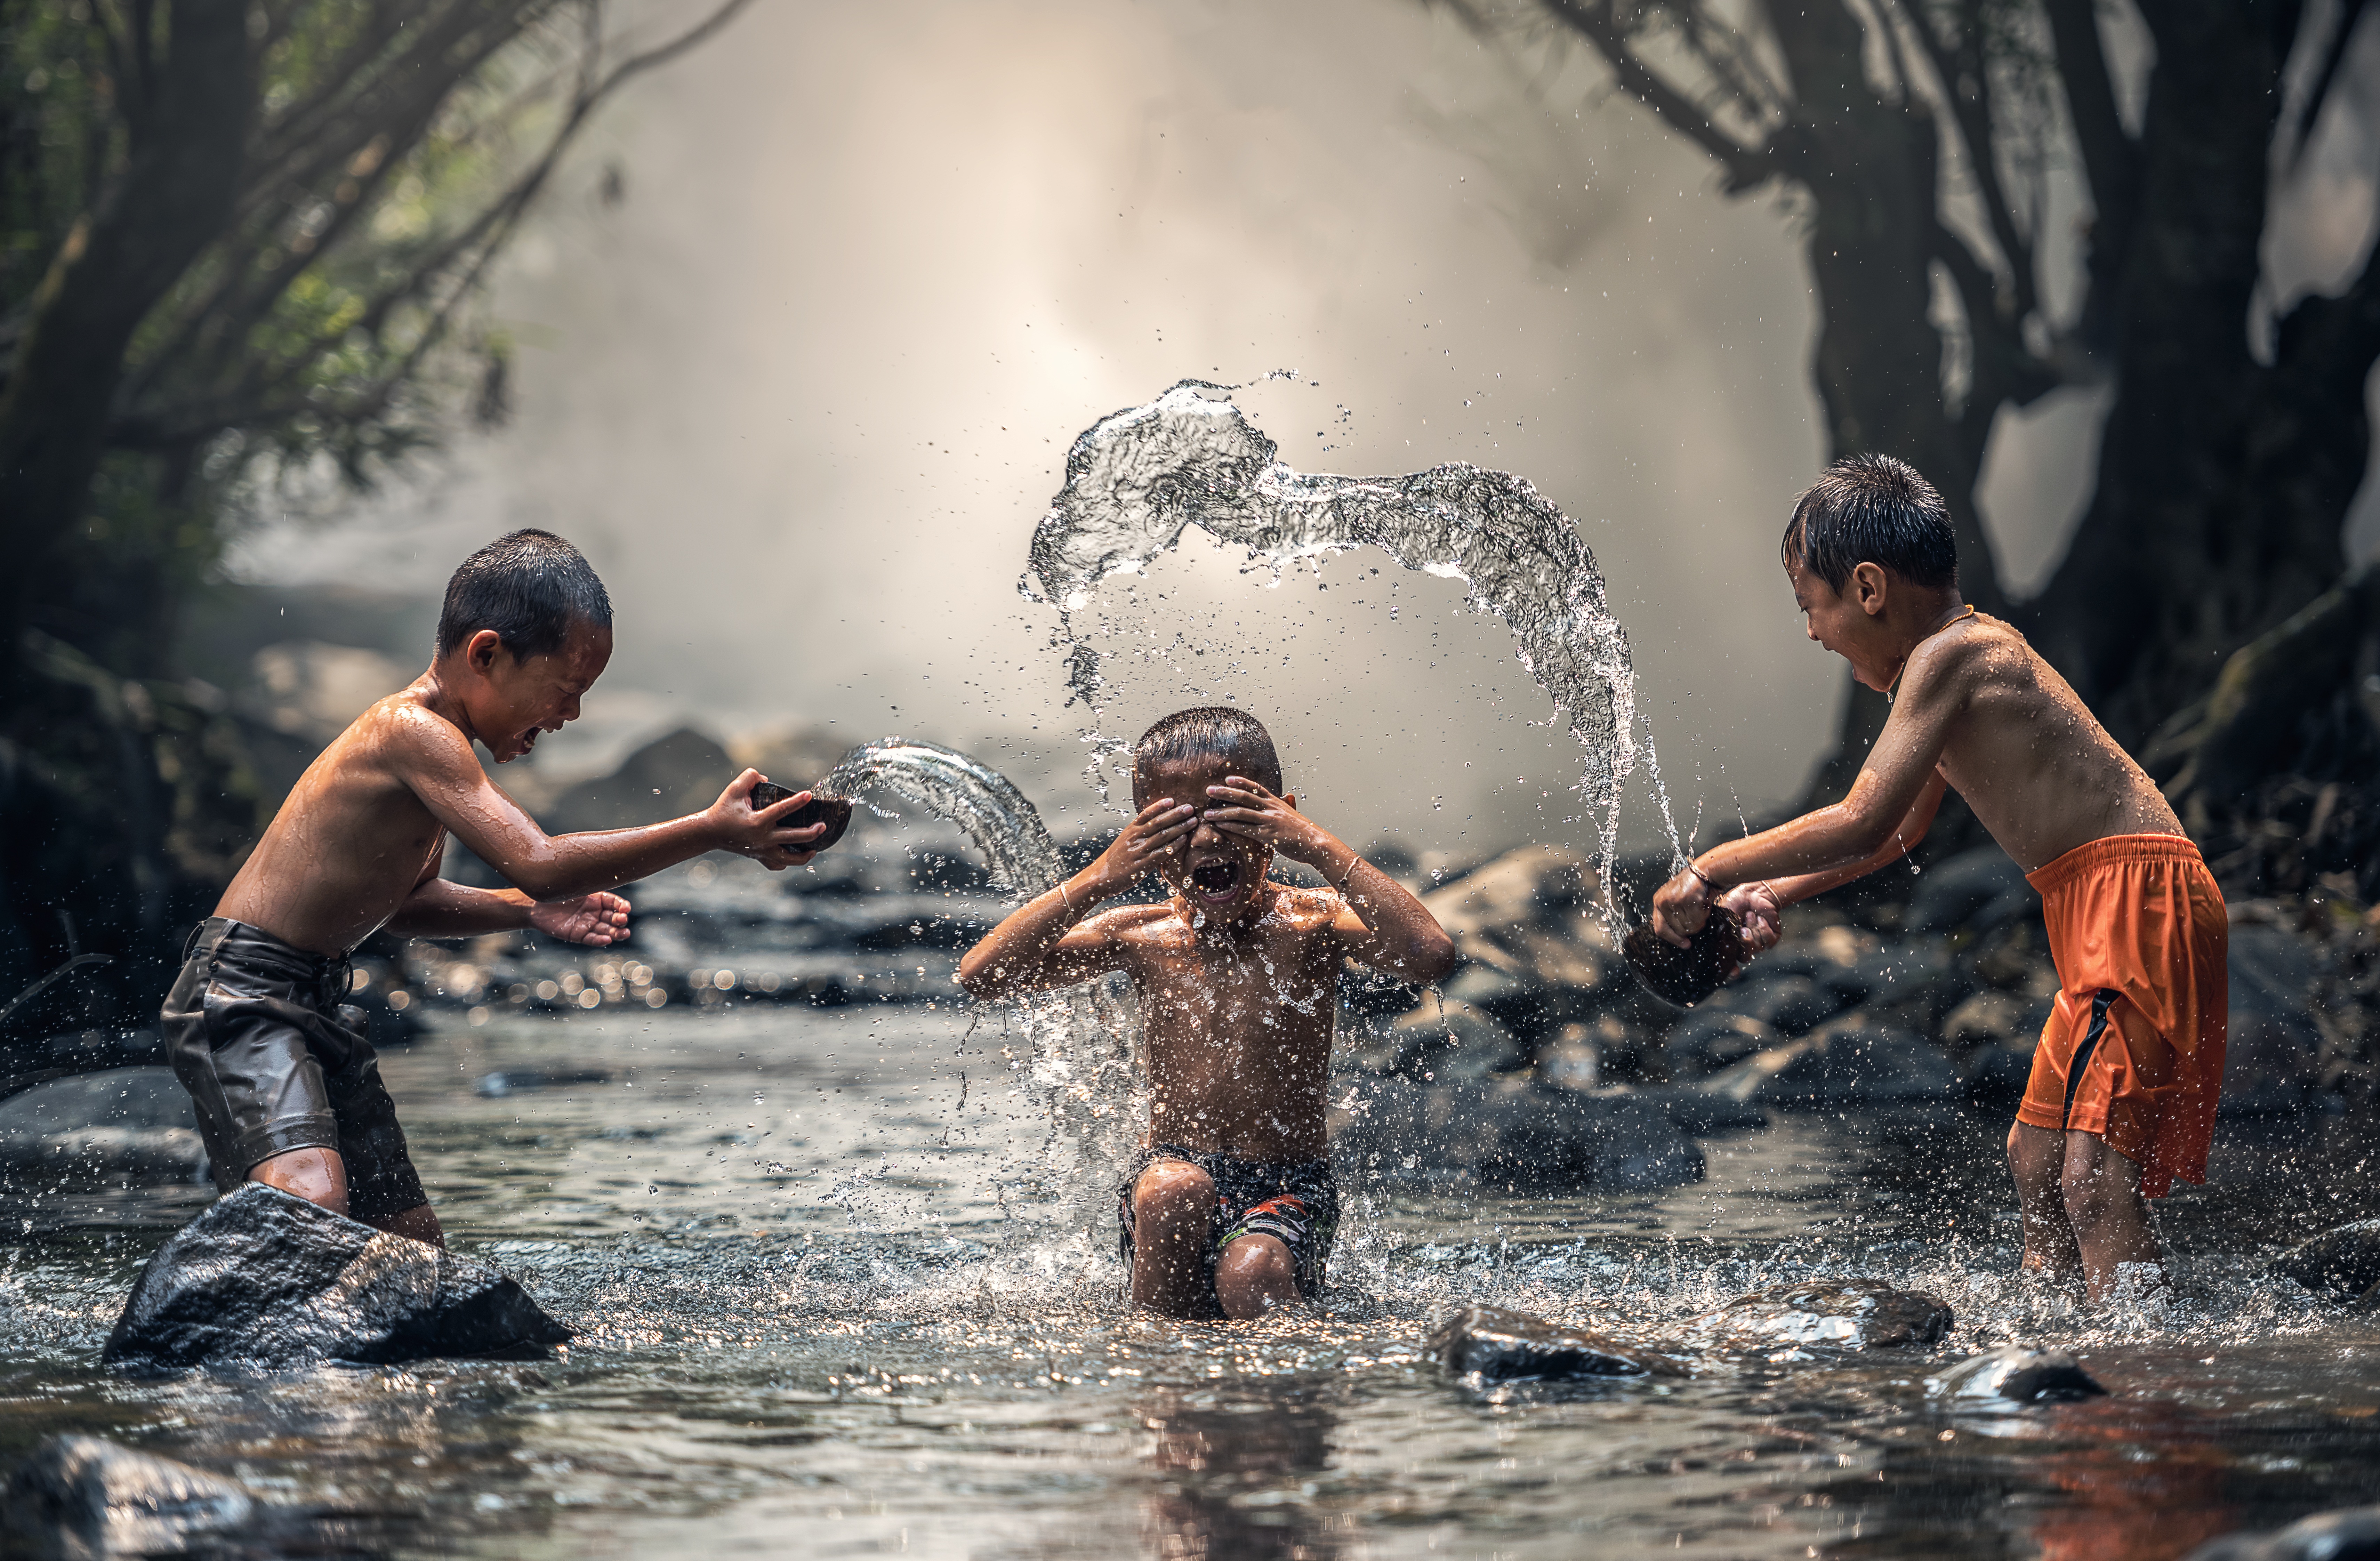 Image: Children playing in a pond